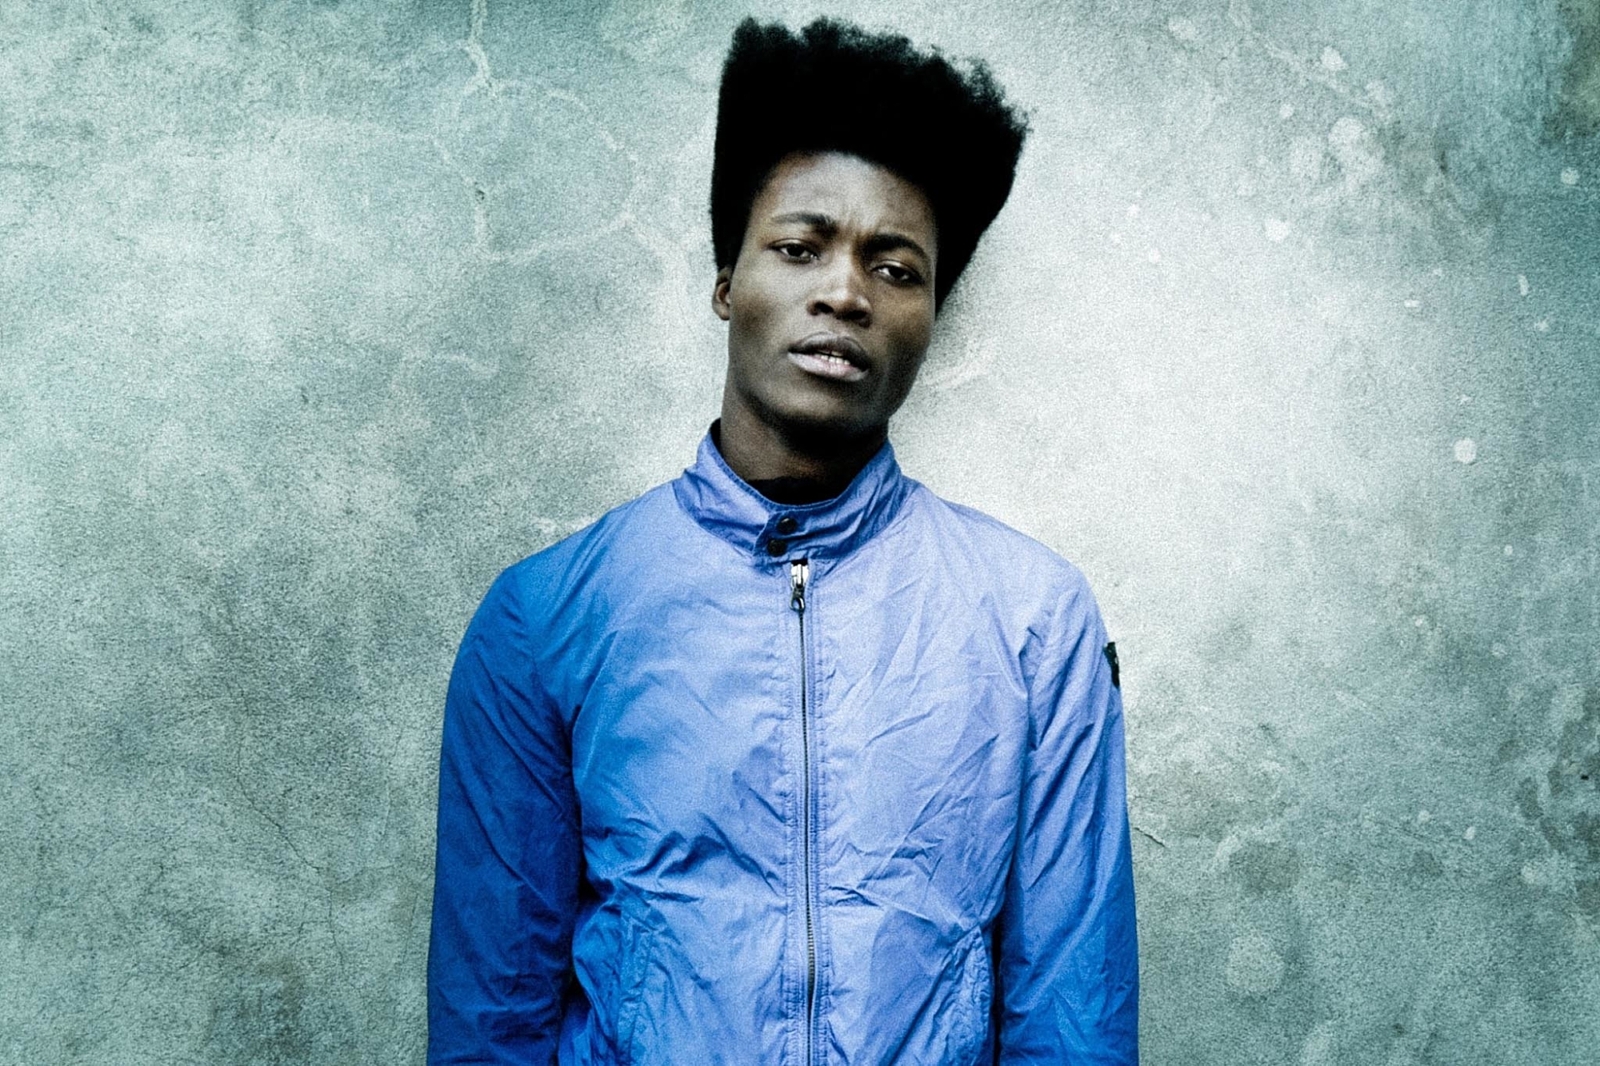 Mercury Prize 2015 - Benjamin Clementine: "We’ve already won - all of us."